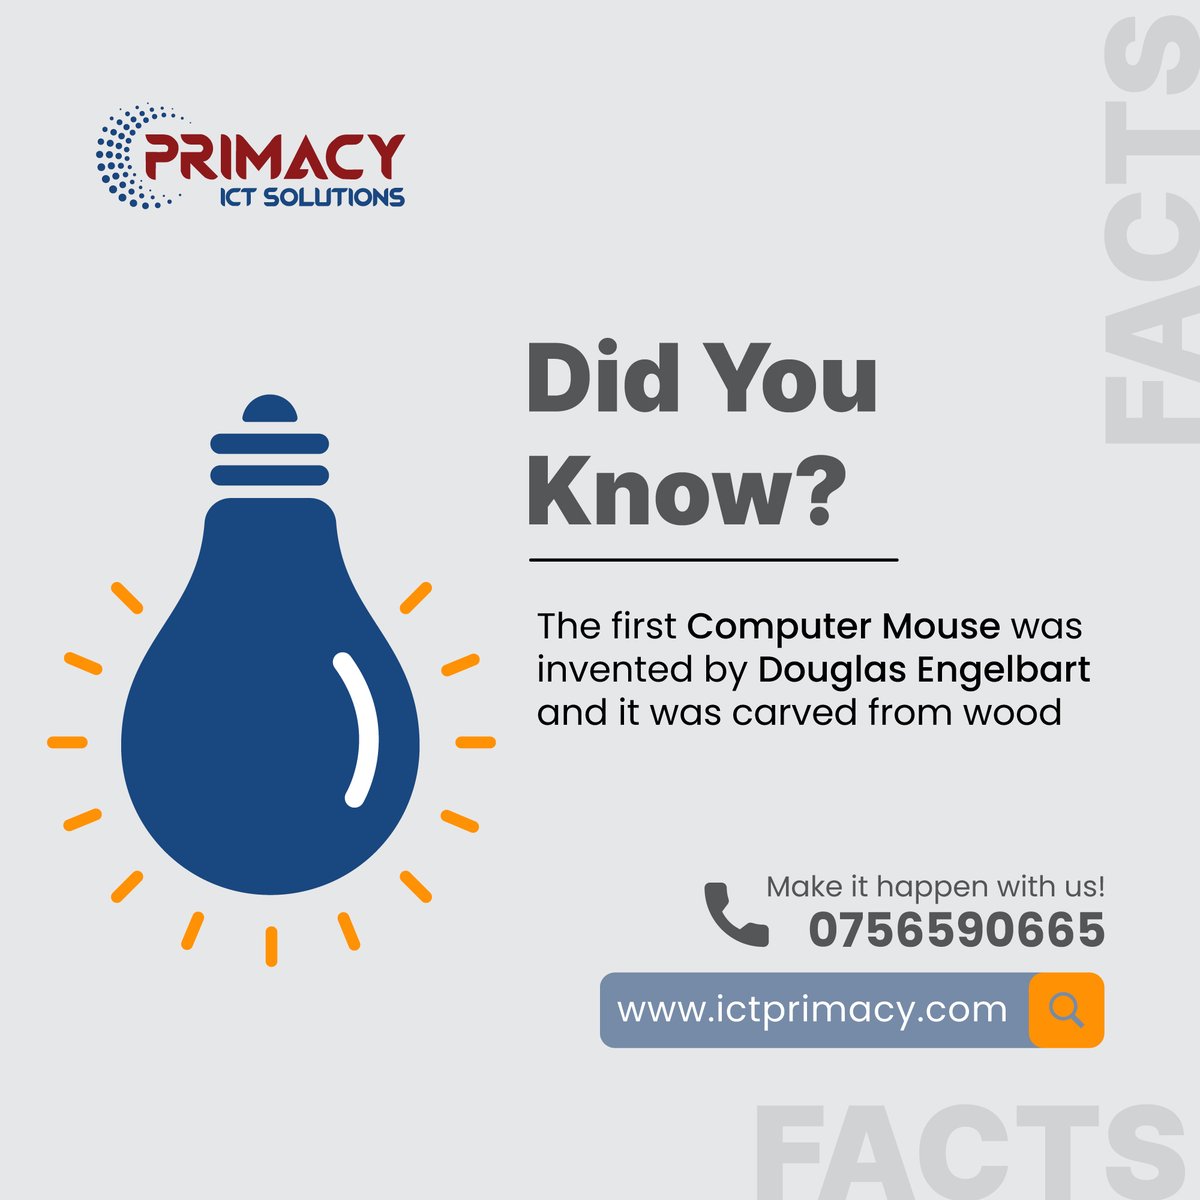 Did you Know? The first computer mouse was crafted from wood by the ingenious Douglas Engelbart. #Primacy #TechTrivia #DidYouKnow #ICTSolutions